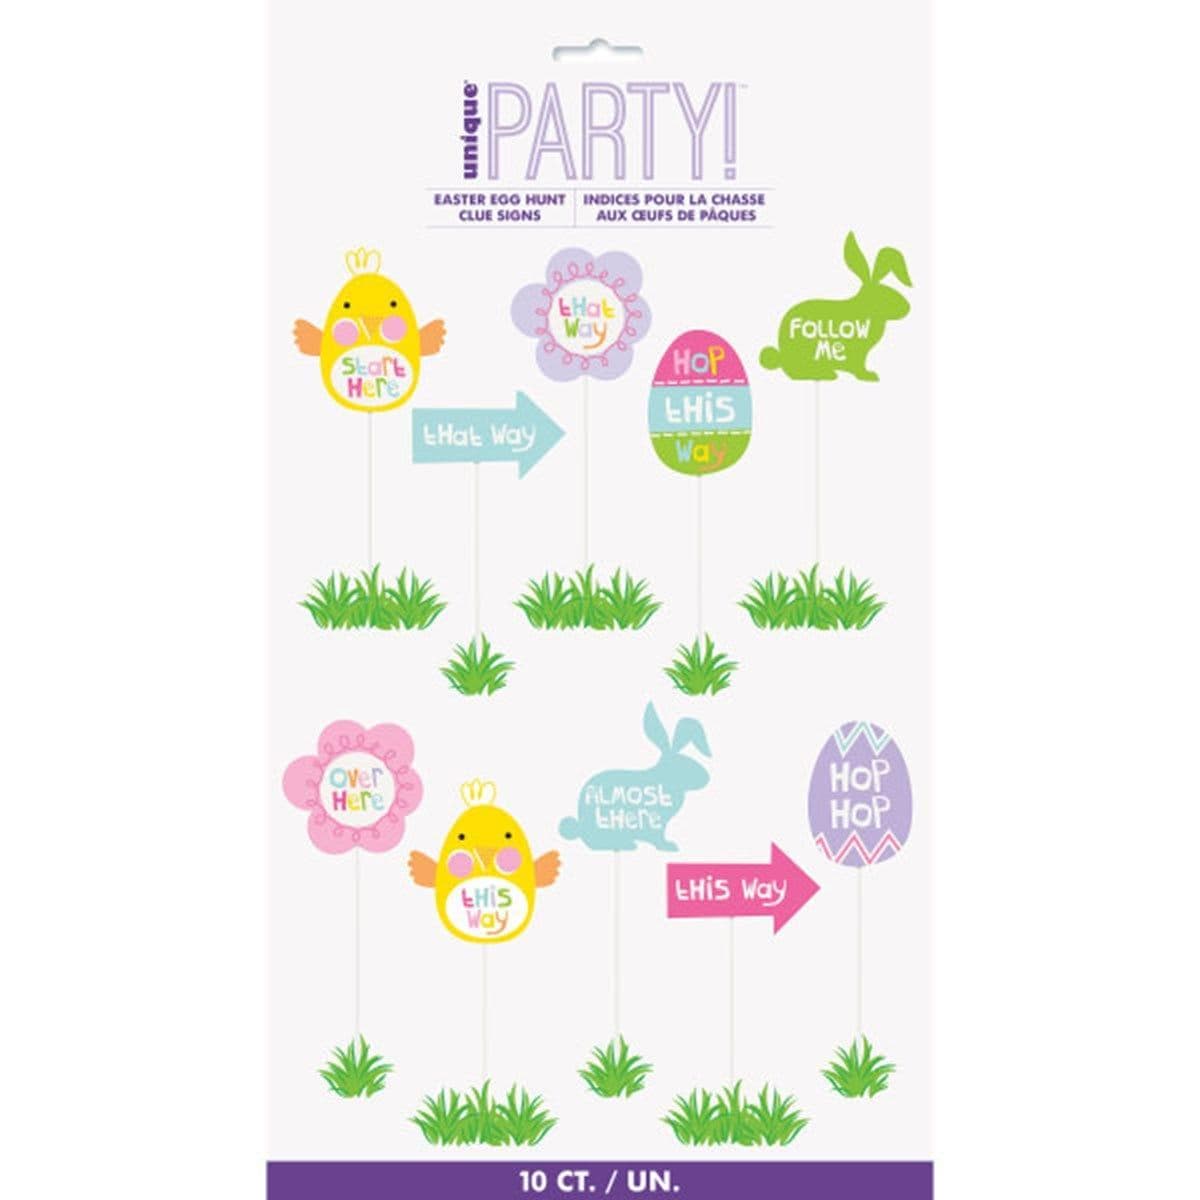 Buy Easter Easter Egg Hunt Clue Signs sold at Party Expert